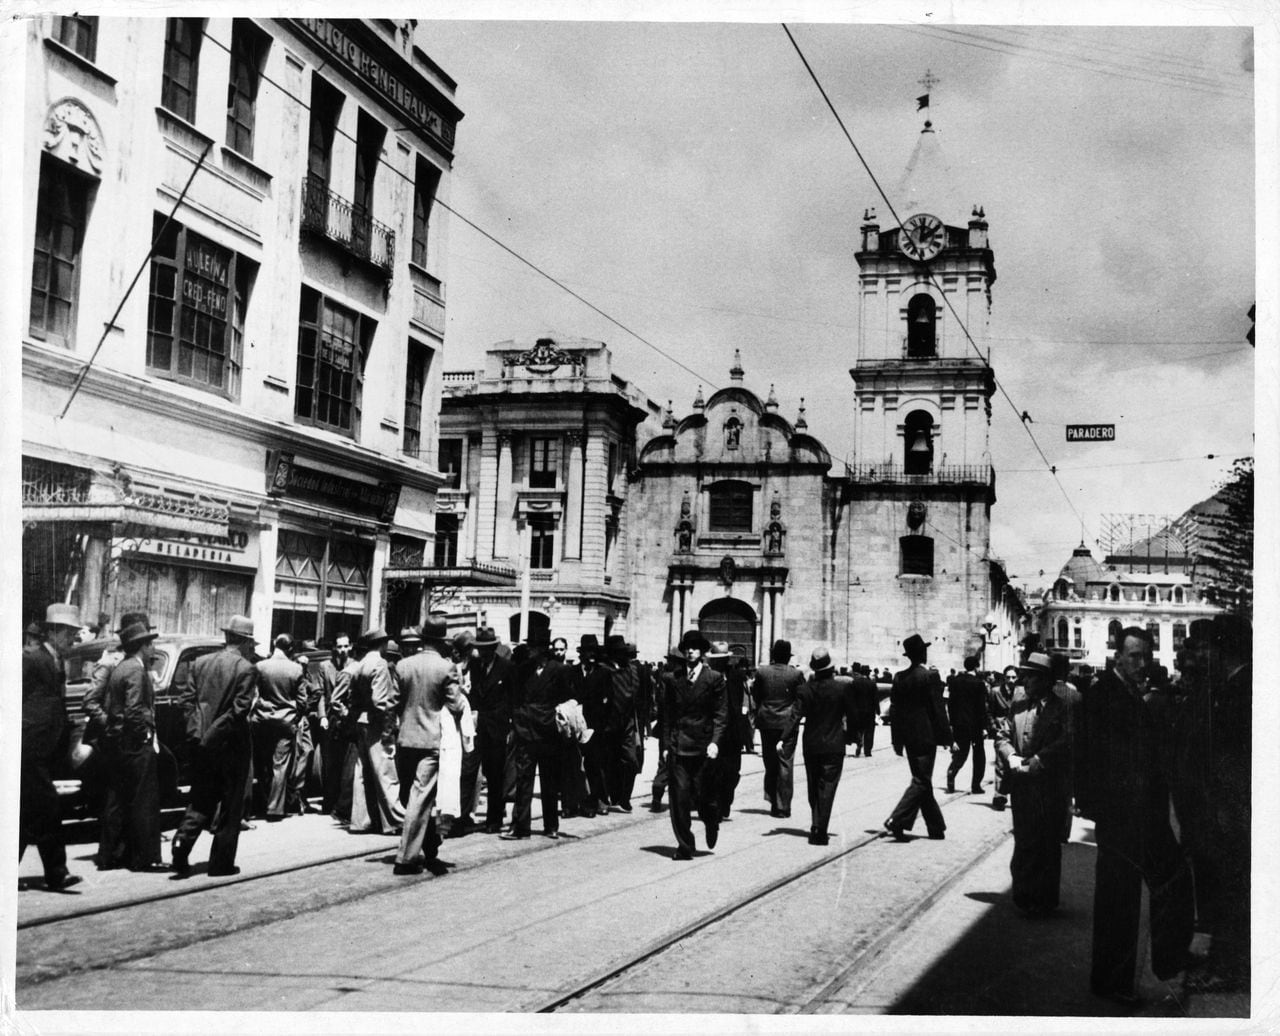 A view of men in suits walk the streets in Bogotá, Columbia. (Photo by Herbert/Archive Photos/Getty Images)